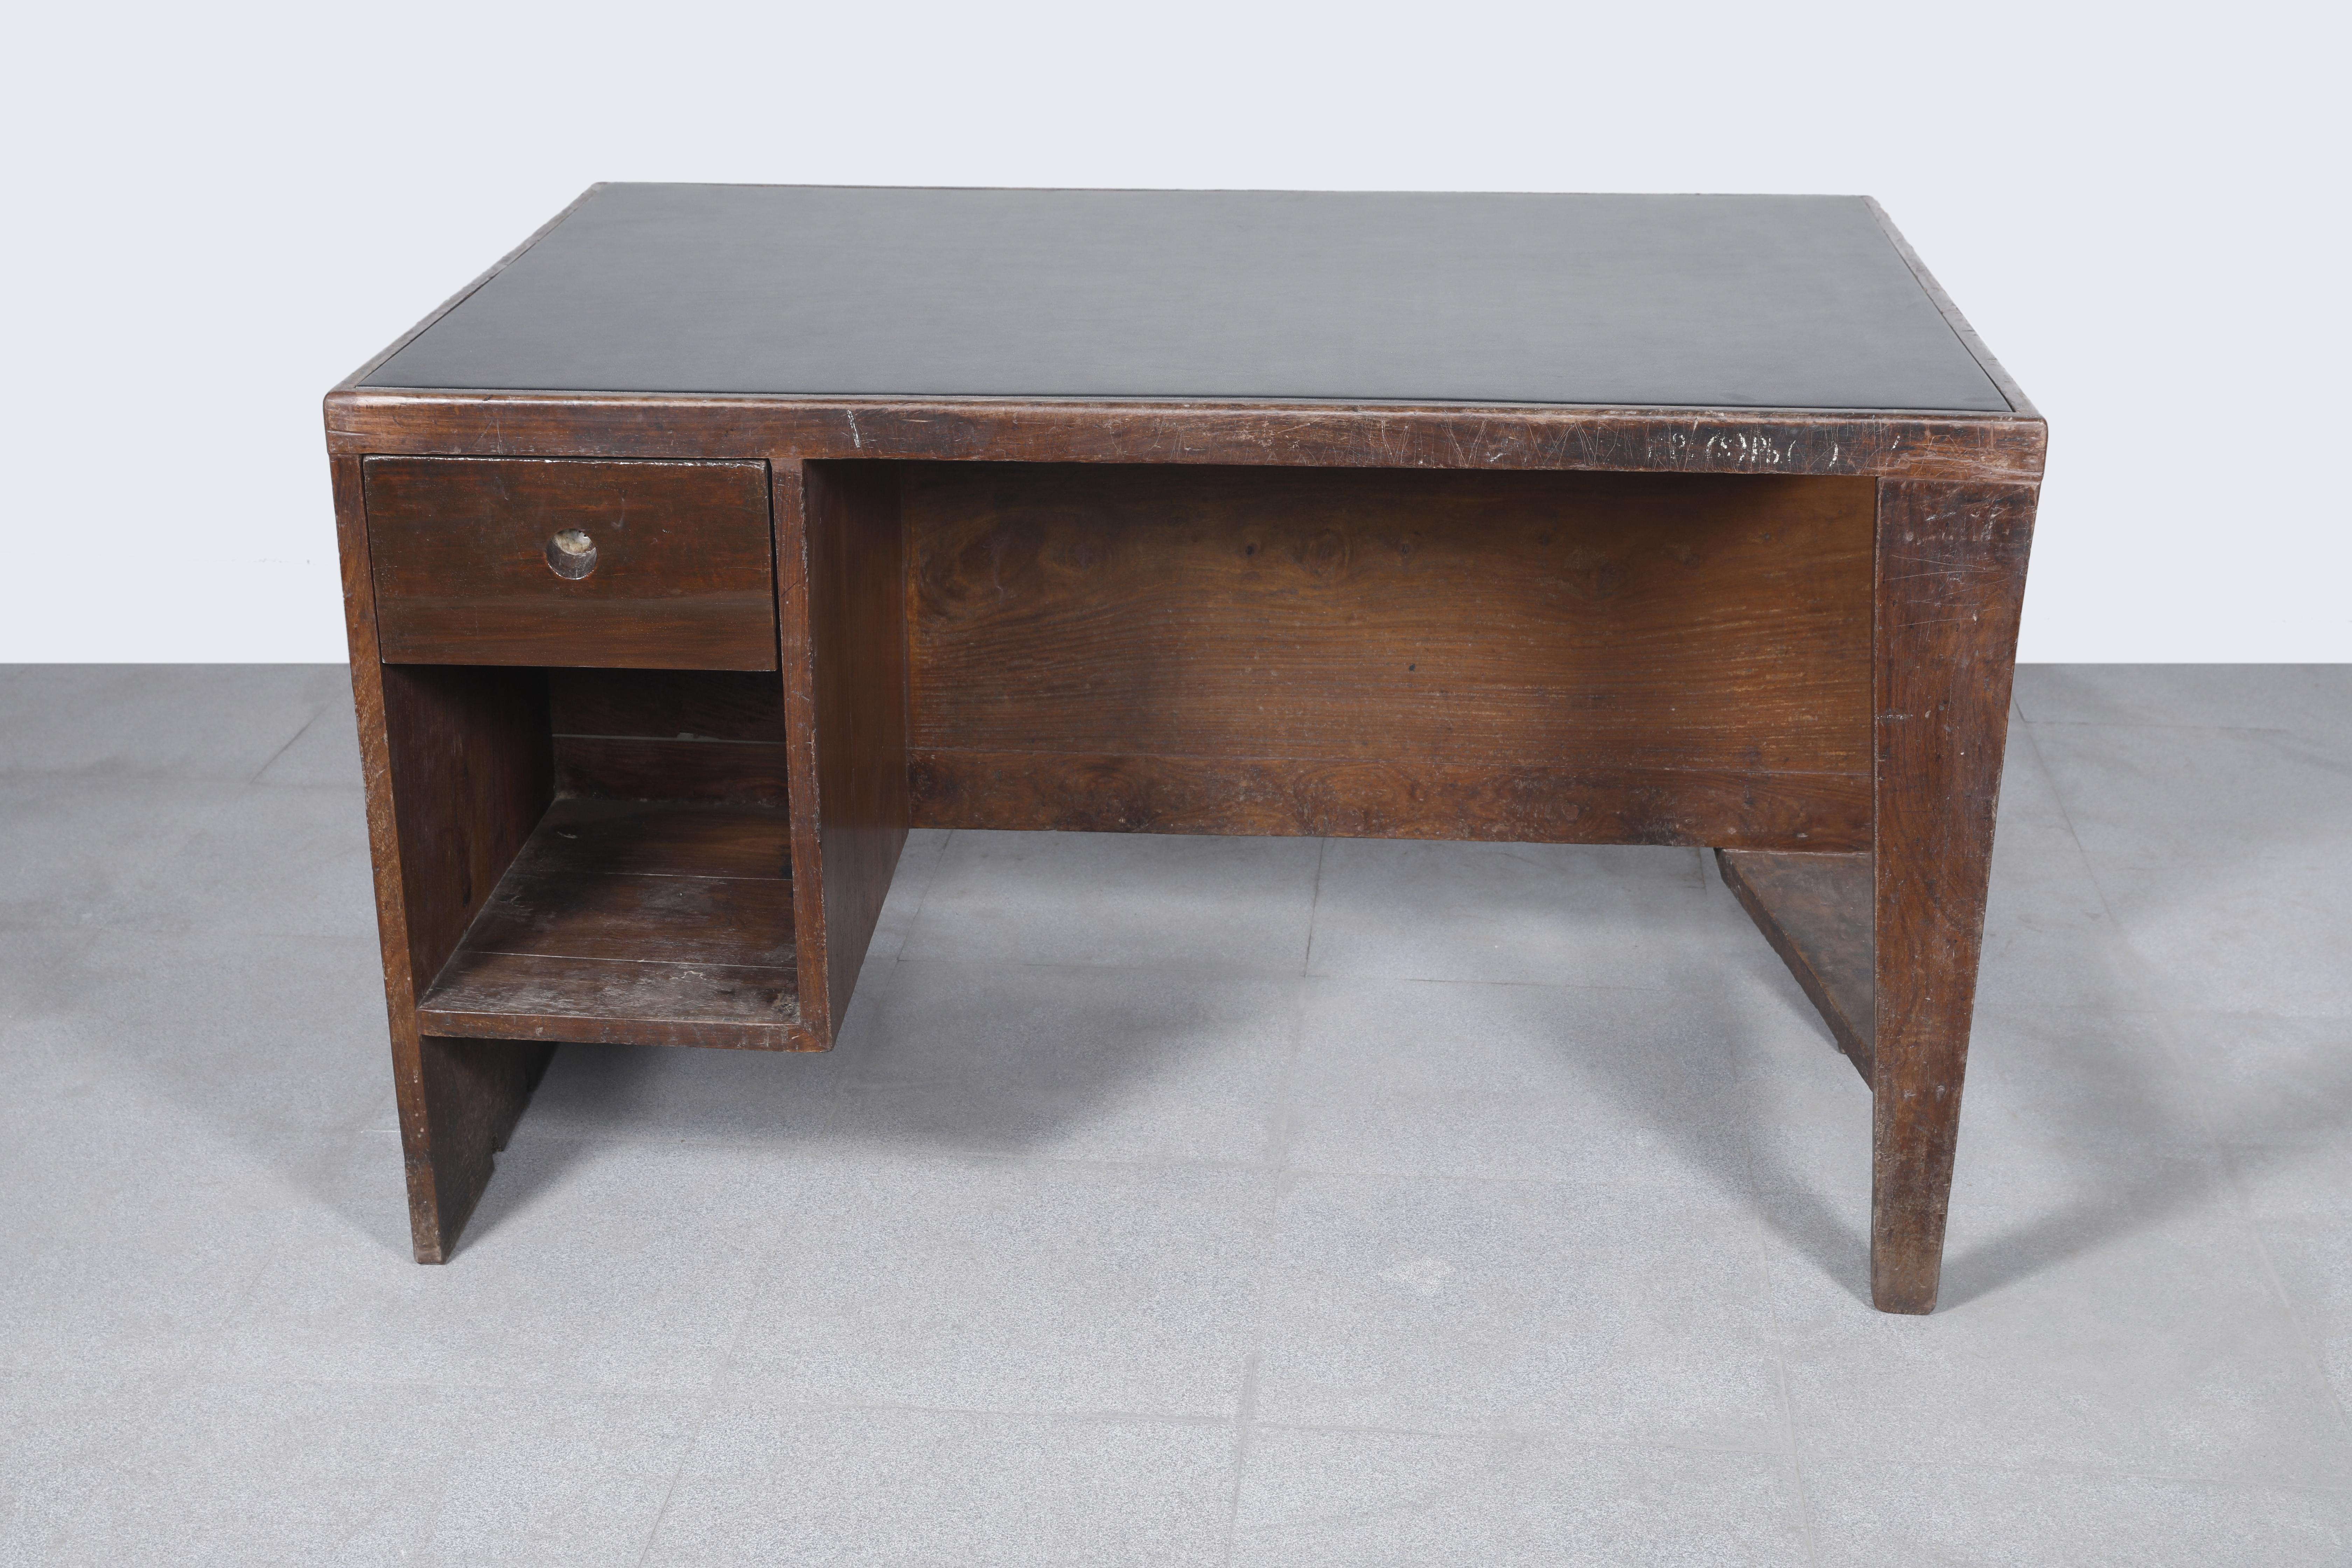 Office desk, 1957-1958. Rectangular top covered in black leather on a frame, affixed on one side by a panel forming a left side leg with a box section including a drawer and compartment and on the other side, a profiled leg with a flat triangular